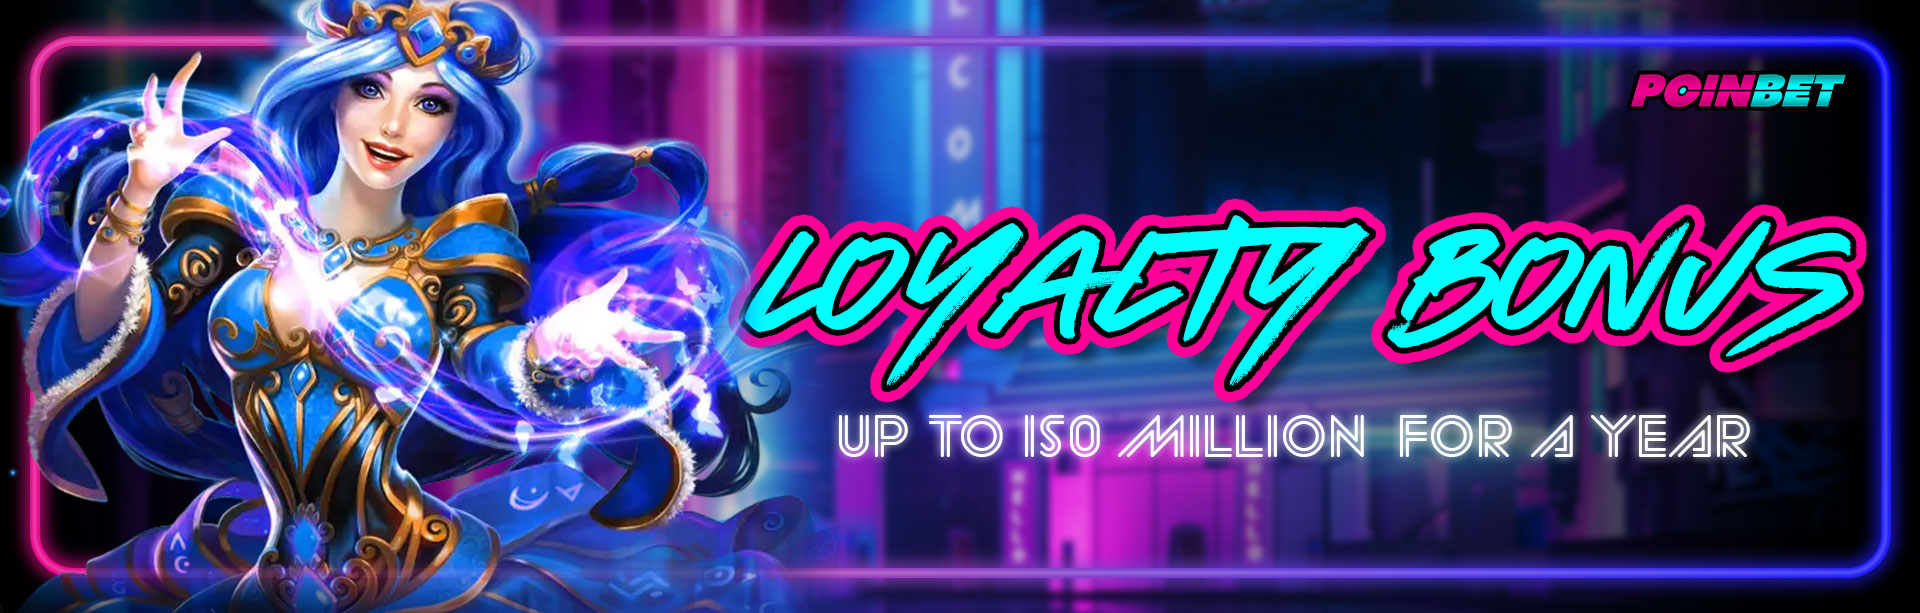 LOYALTY BONUS UP TO 150 MILLION FOR A YEAR